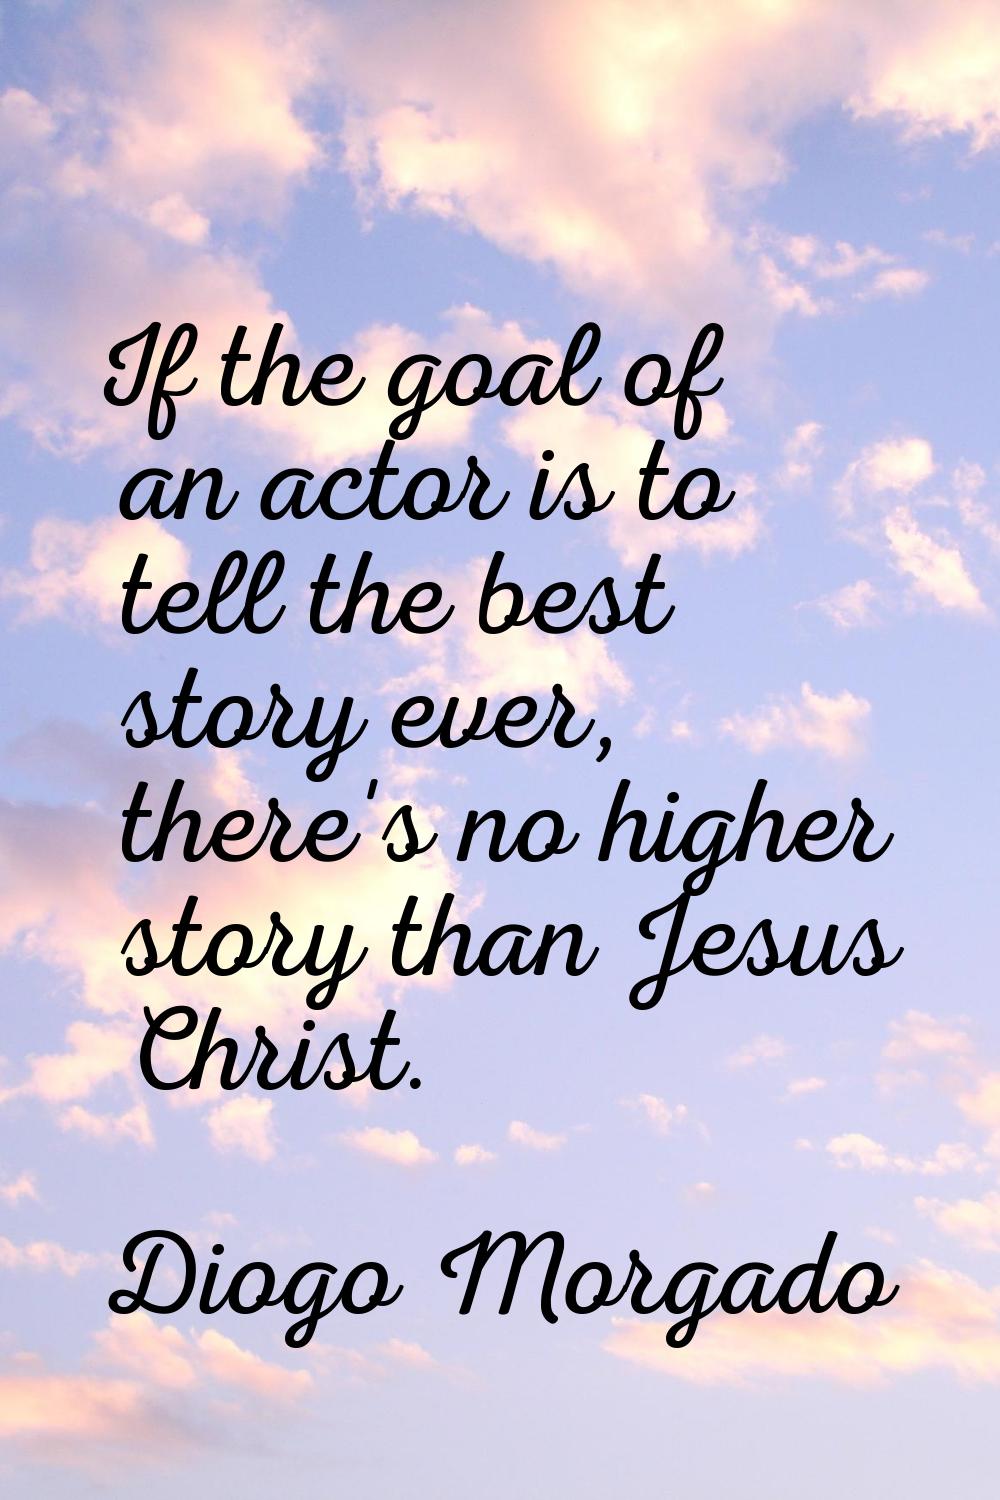 If the goal of an actor is to tell the best story ever, there's no higher story than Jesus Christ.